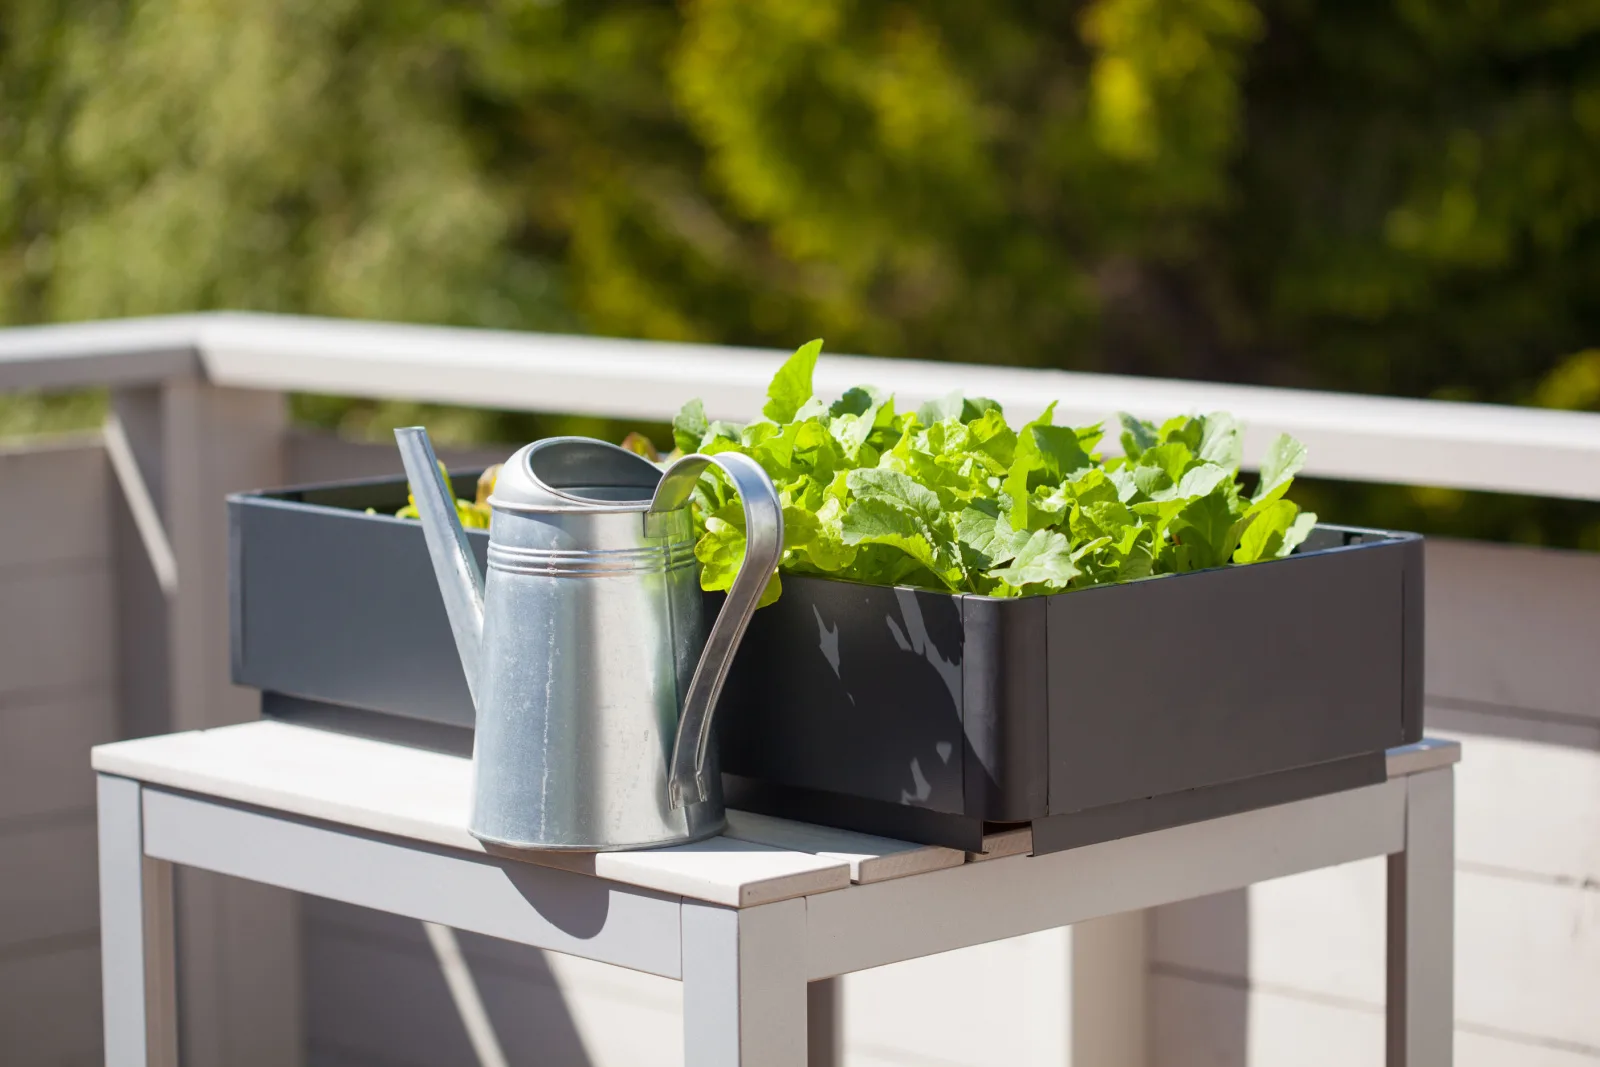 growing radish and salad in container on balcony. vegetable garden